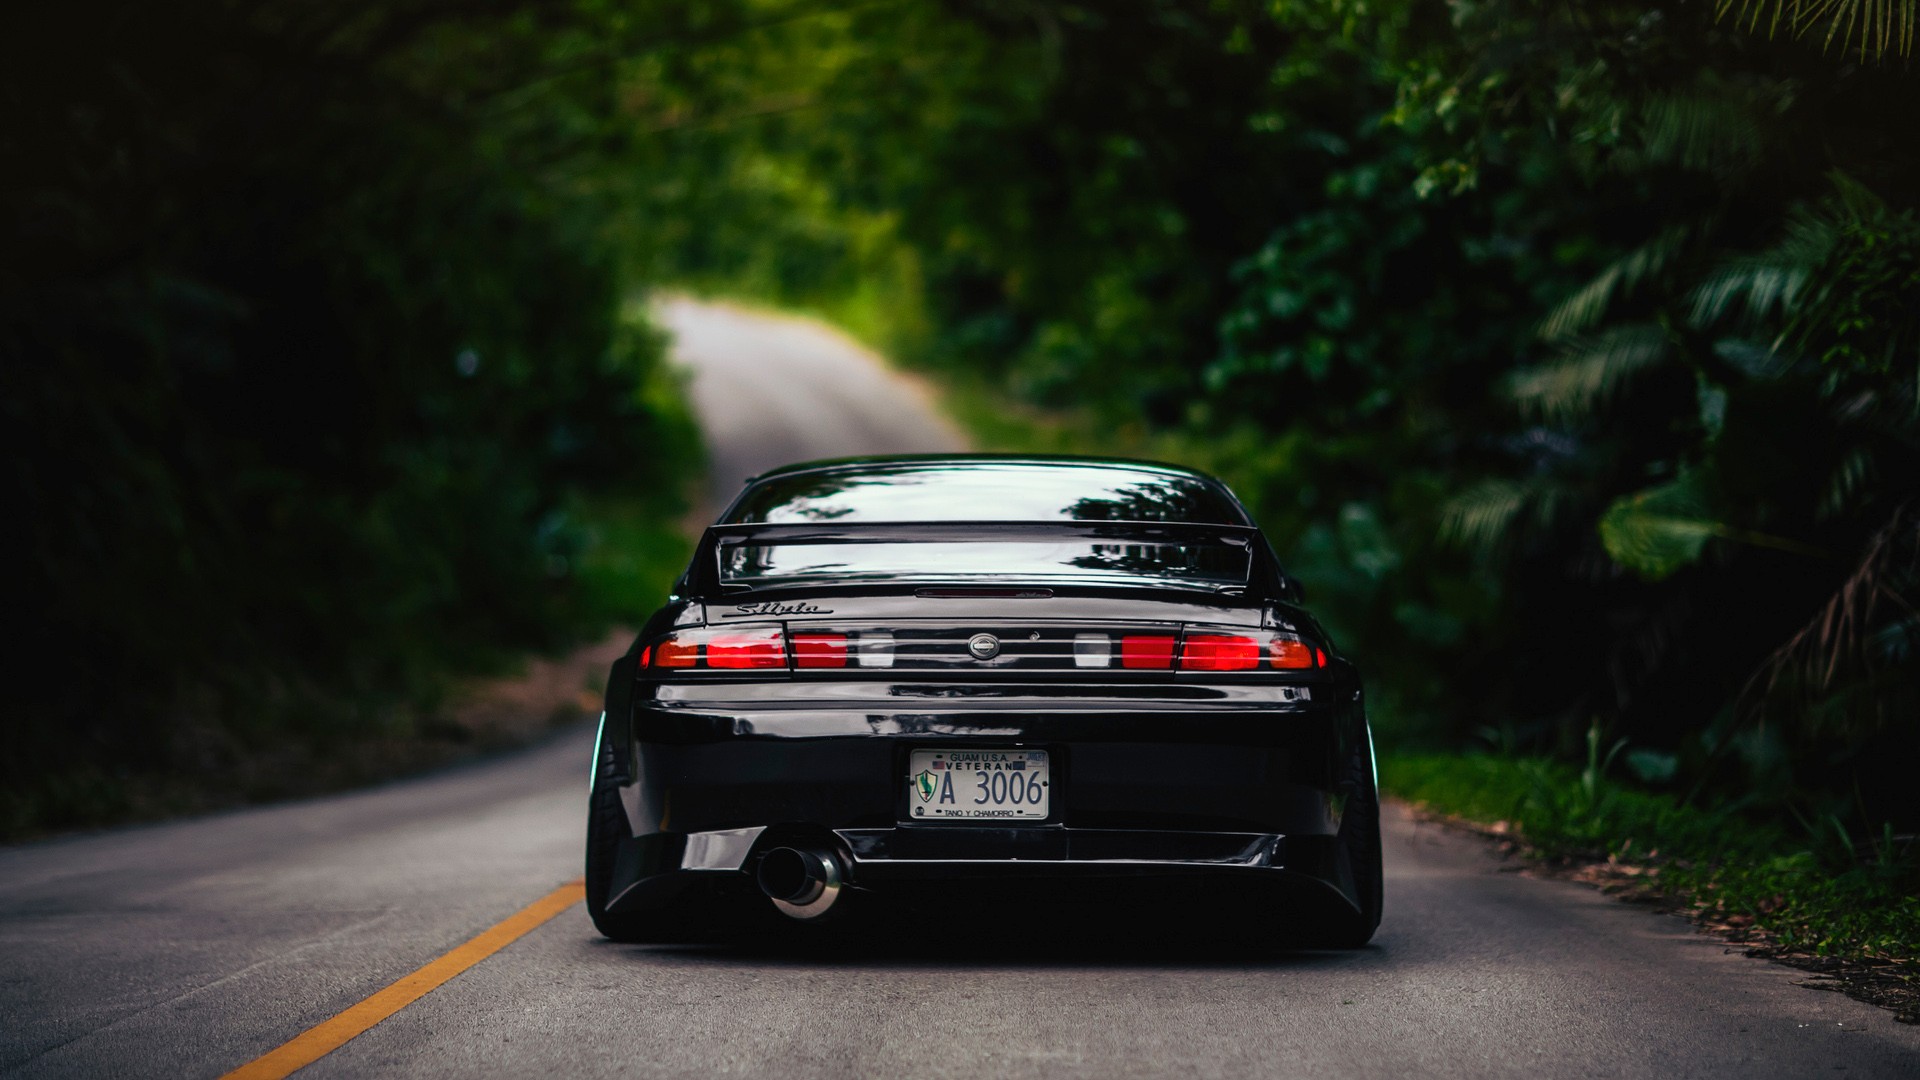 Jdm Cars Wallpapers